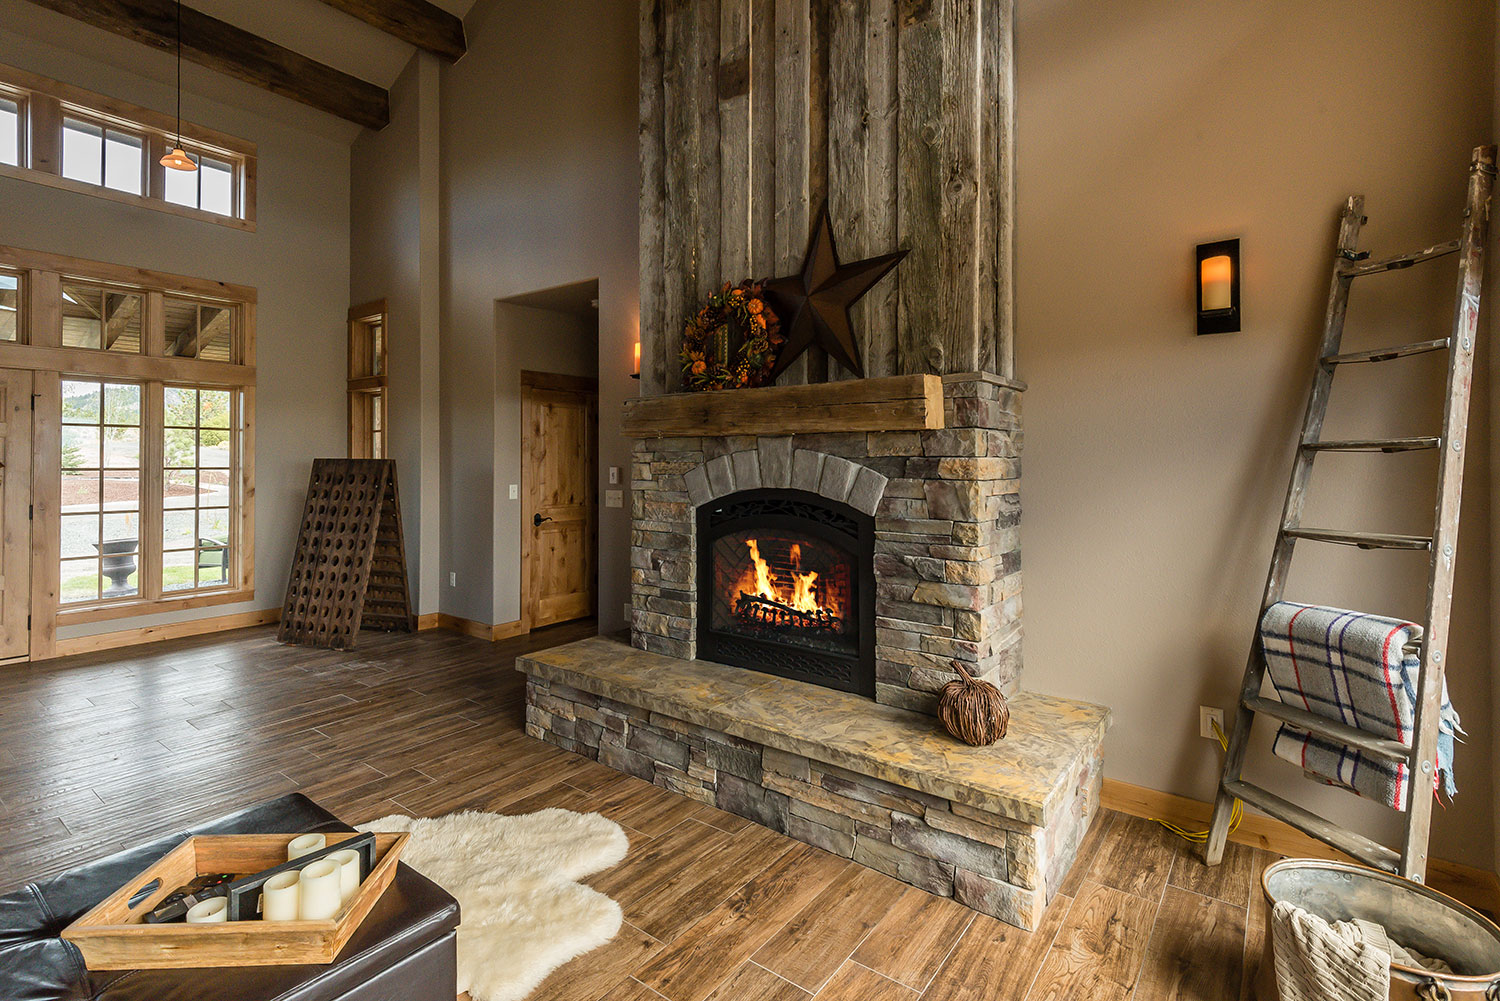 Rock-trimmed fireplace with rustic decor above and around it